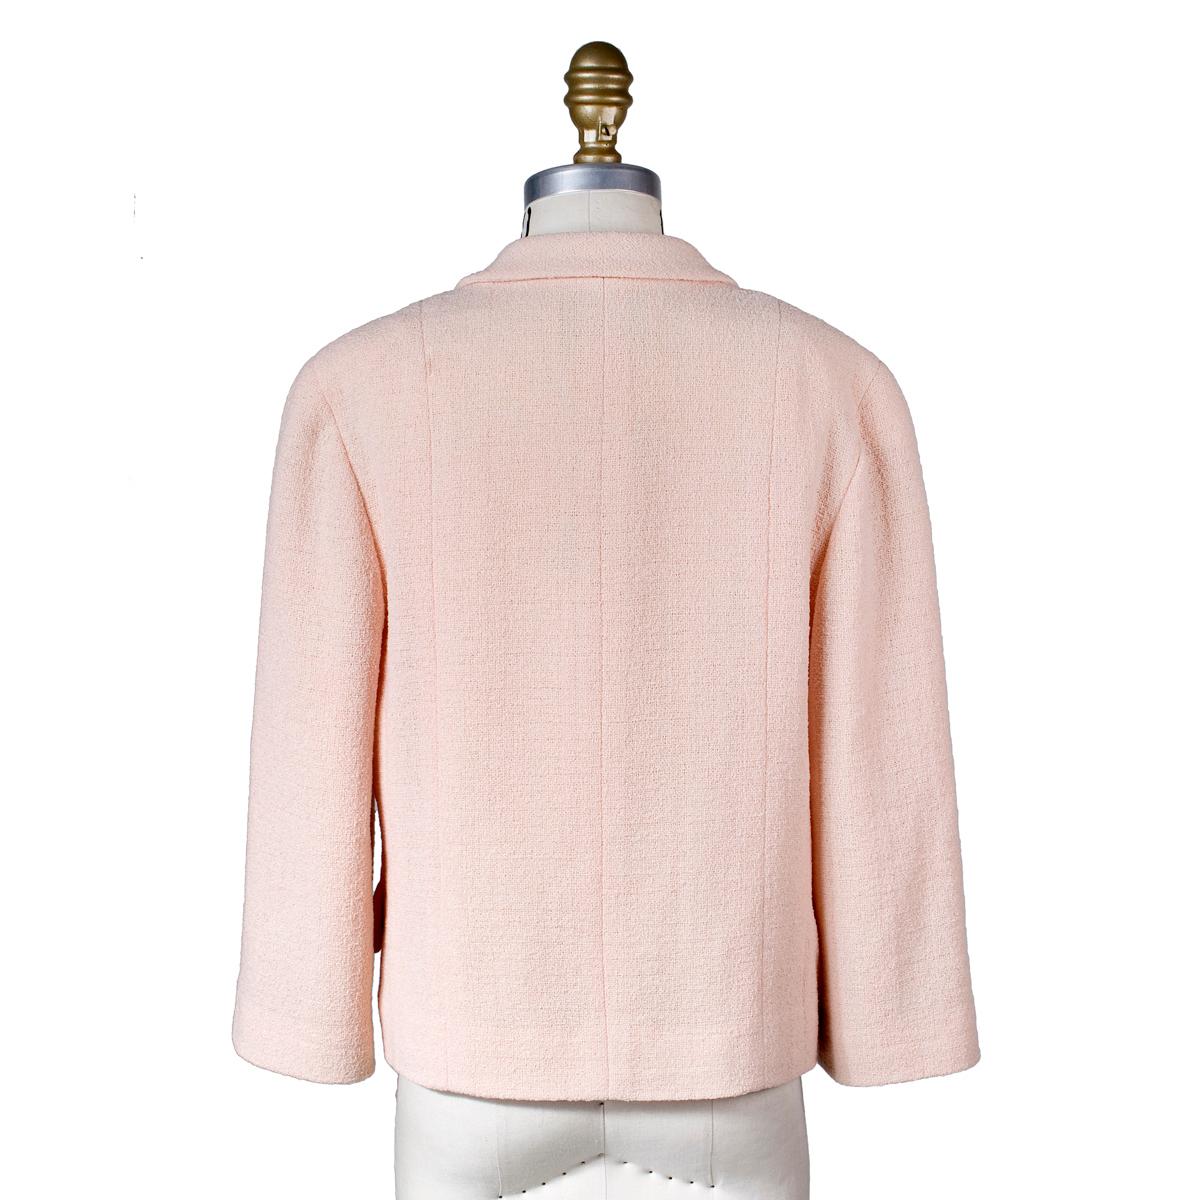 Jacket by Chanel from the Spring 1999 collection 
Baby pink wool
Double breasted with silver metal buttons
Condition: Great vintage condition
Size/Measurements:
Size 34
16